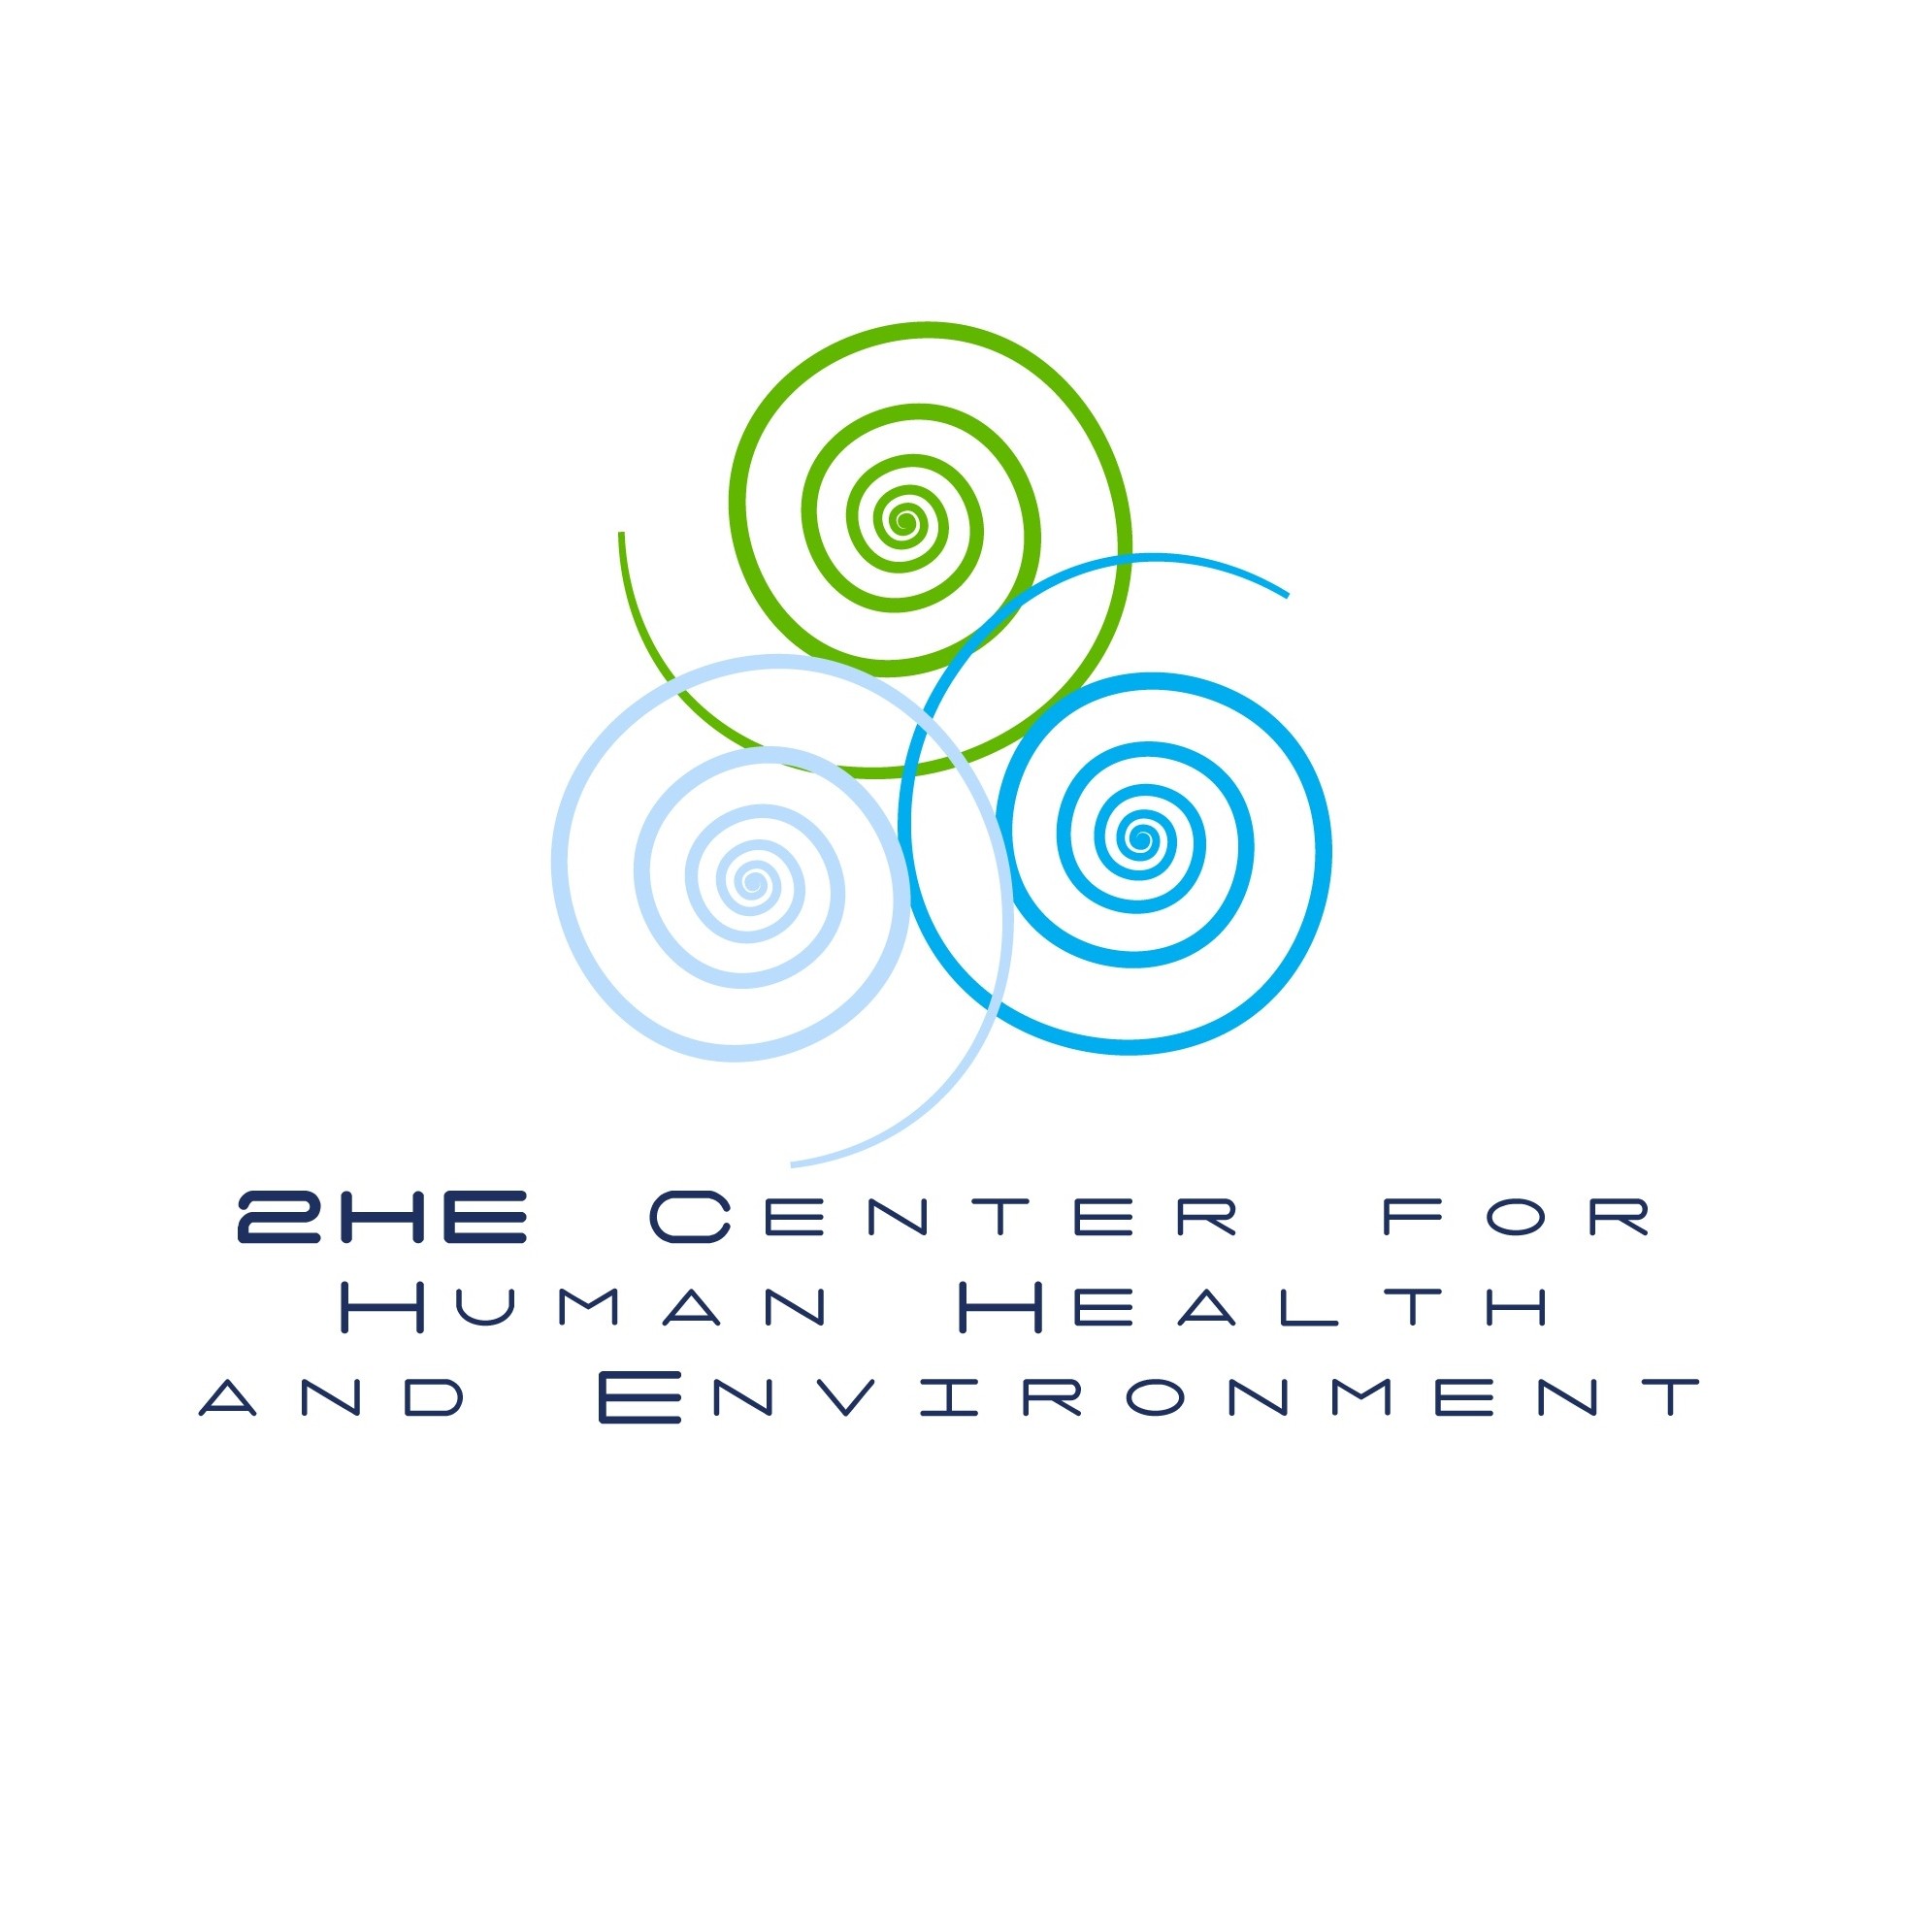 2HE Center for Human Health and Environment